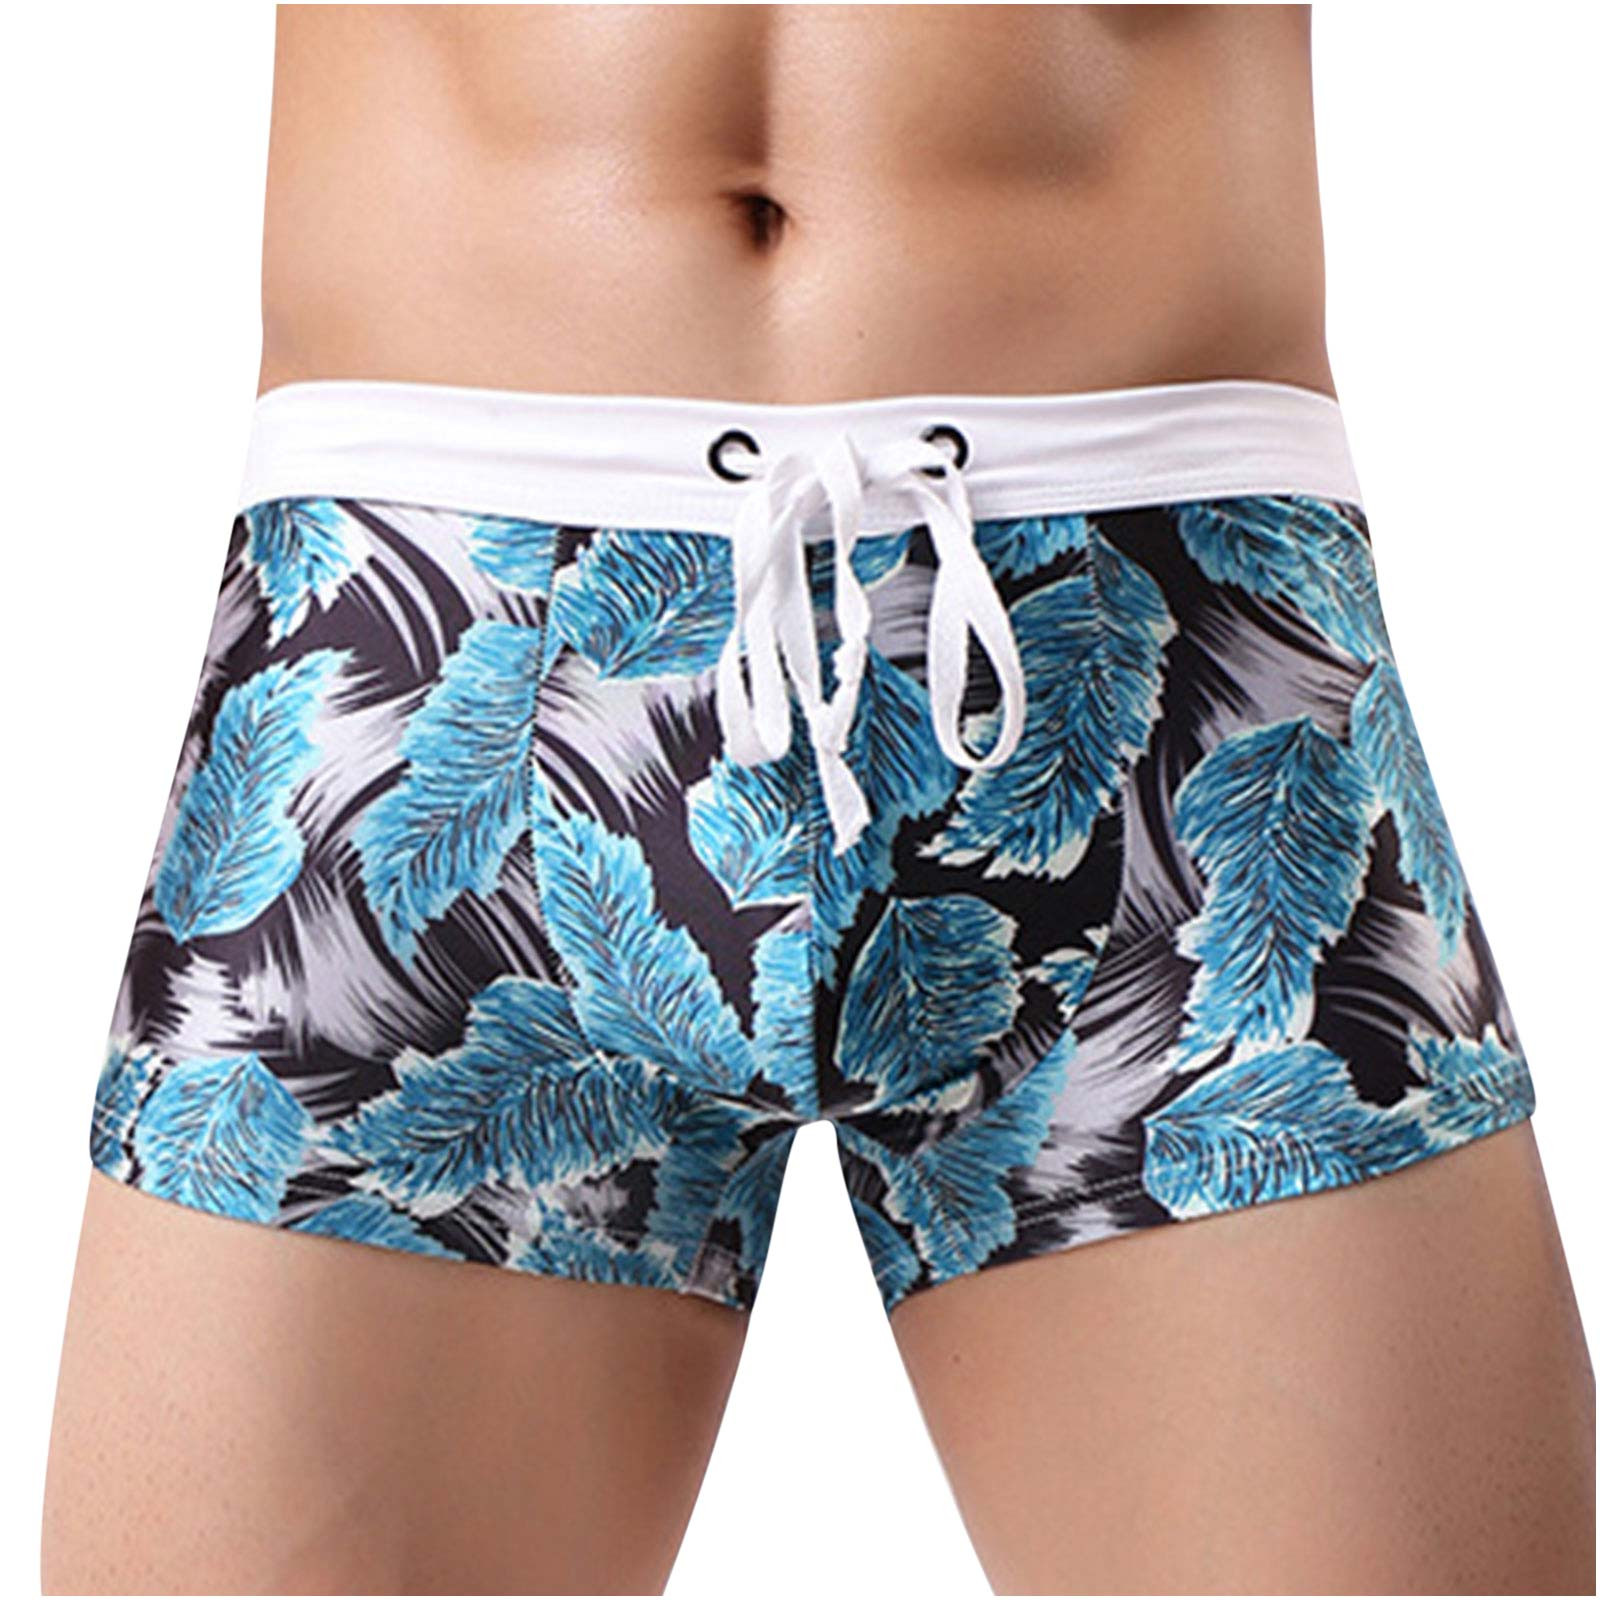 Fanxing Mens Swim Trunks with Compression Swim Shorts Quick Dry ...